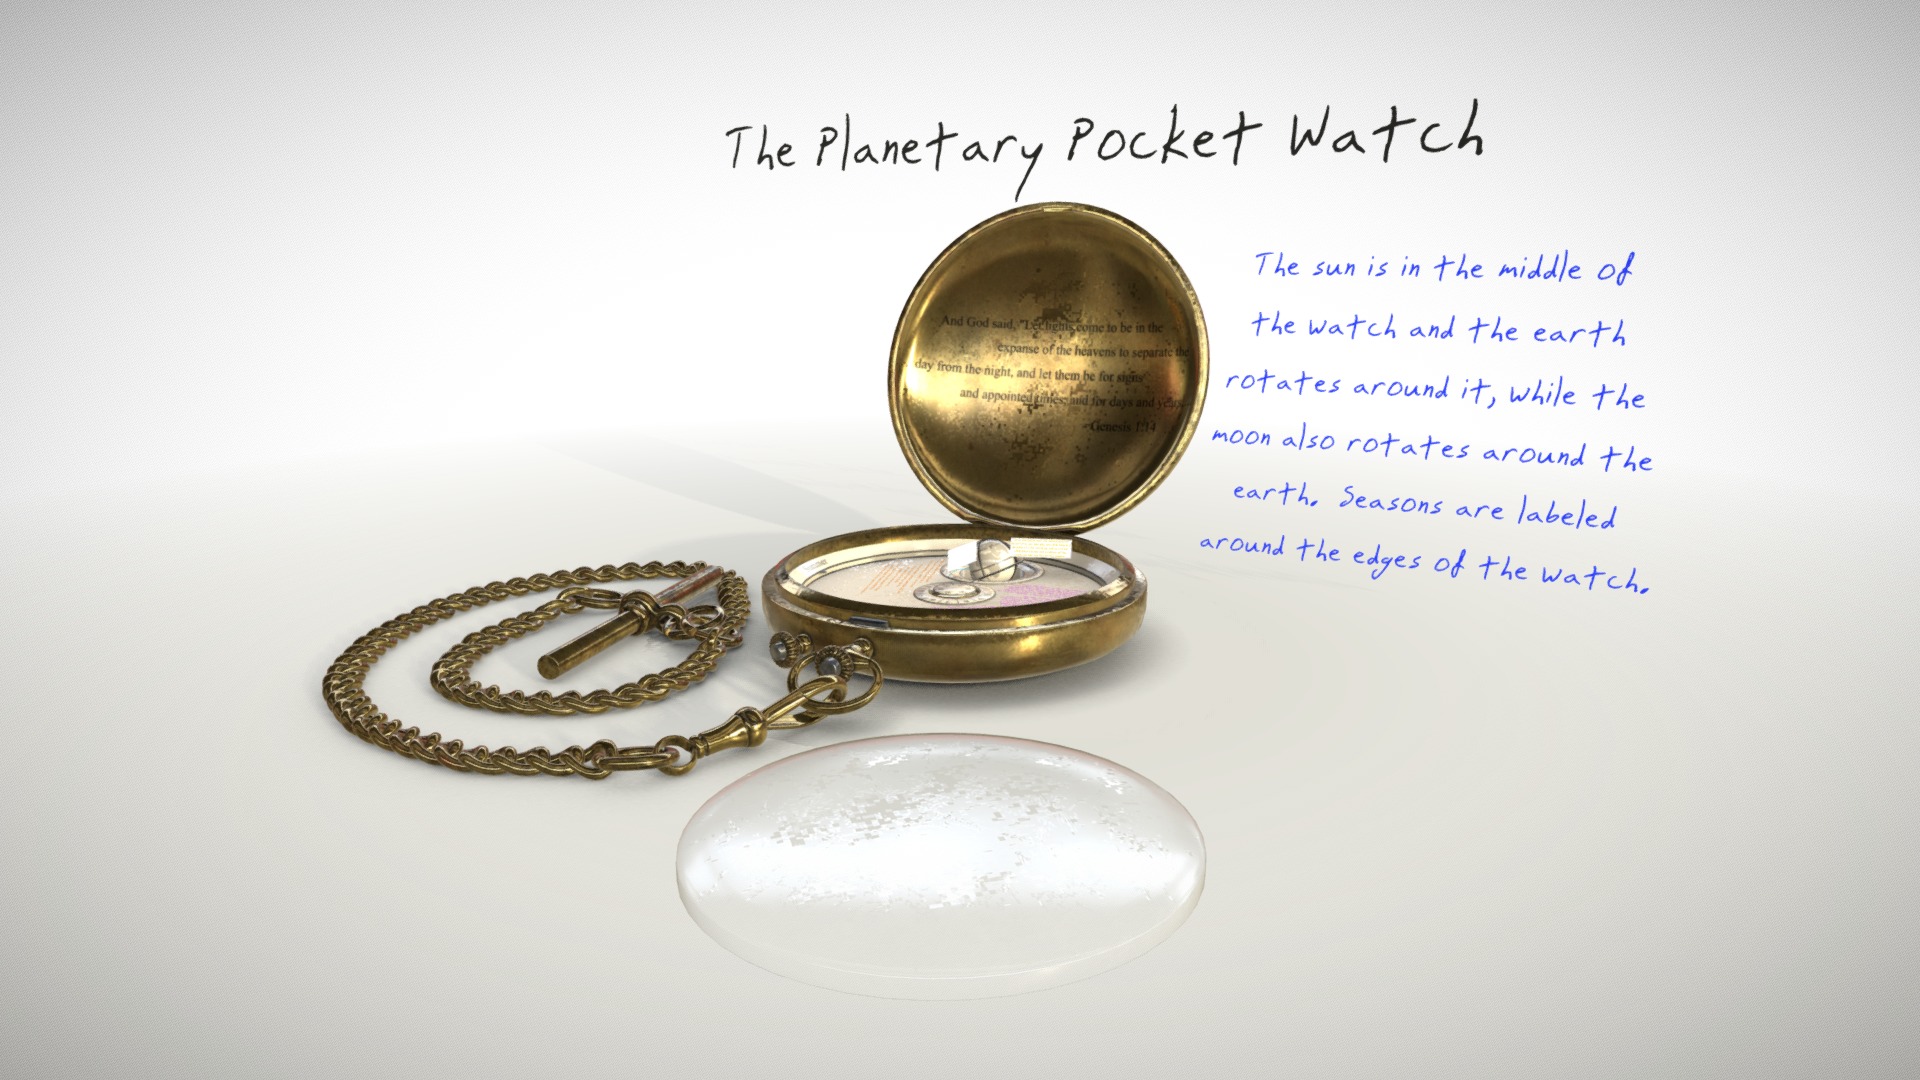 The Working Planetary Pocket Watch